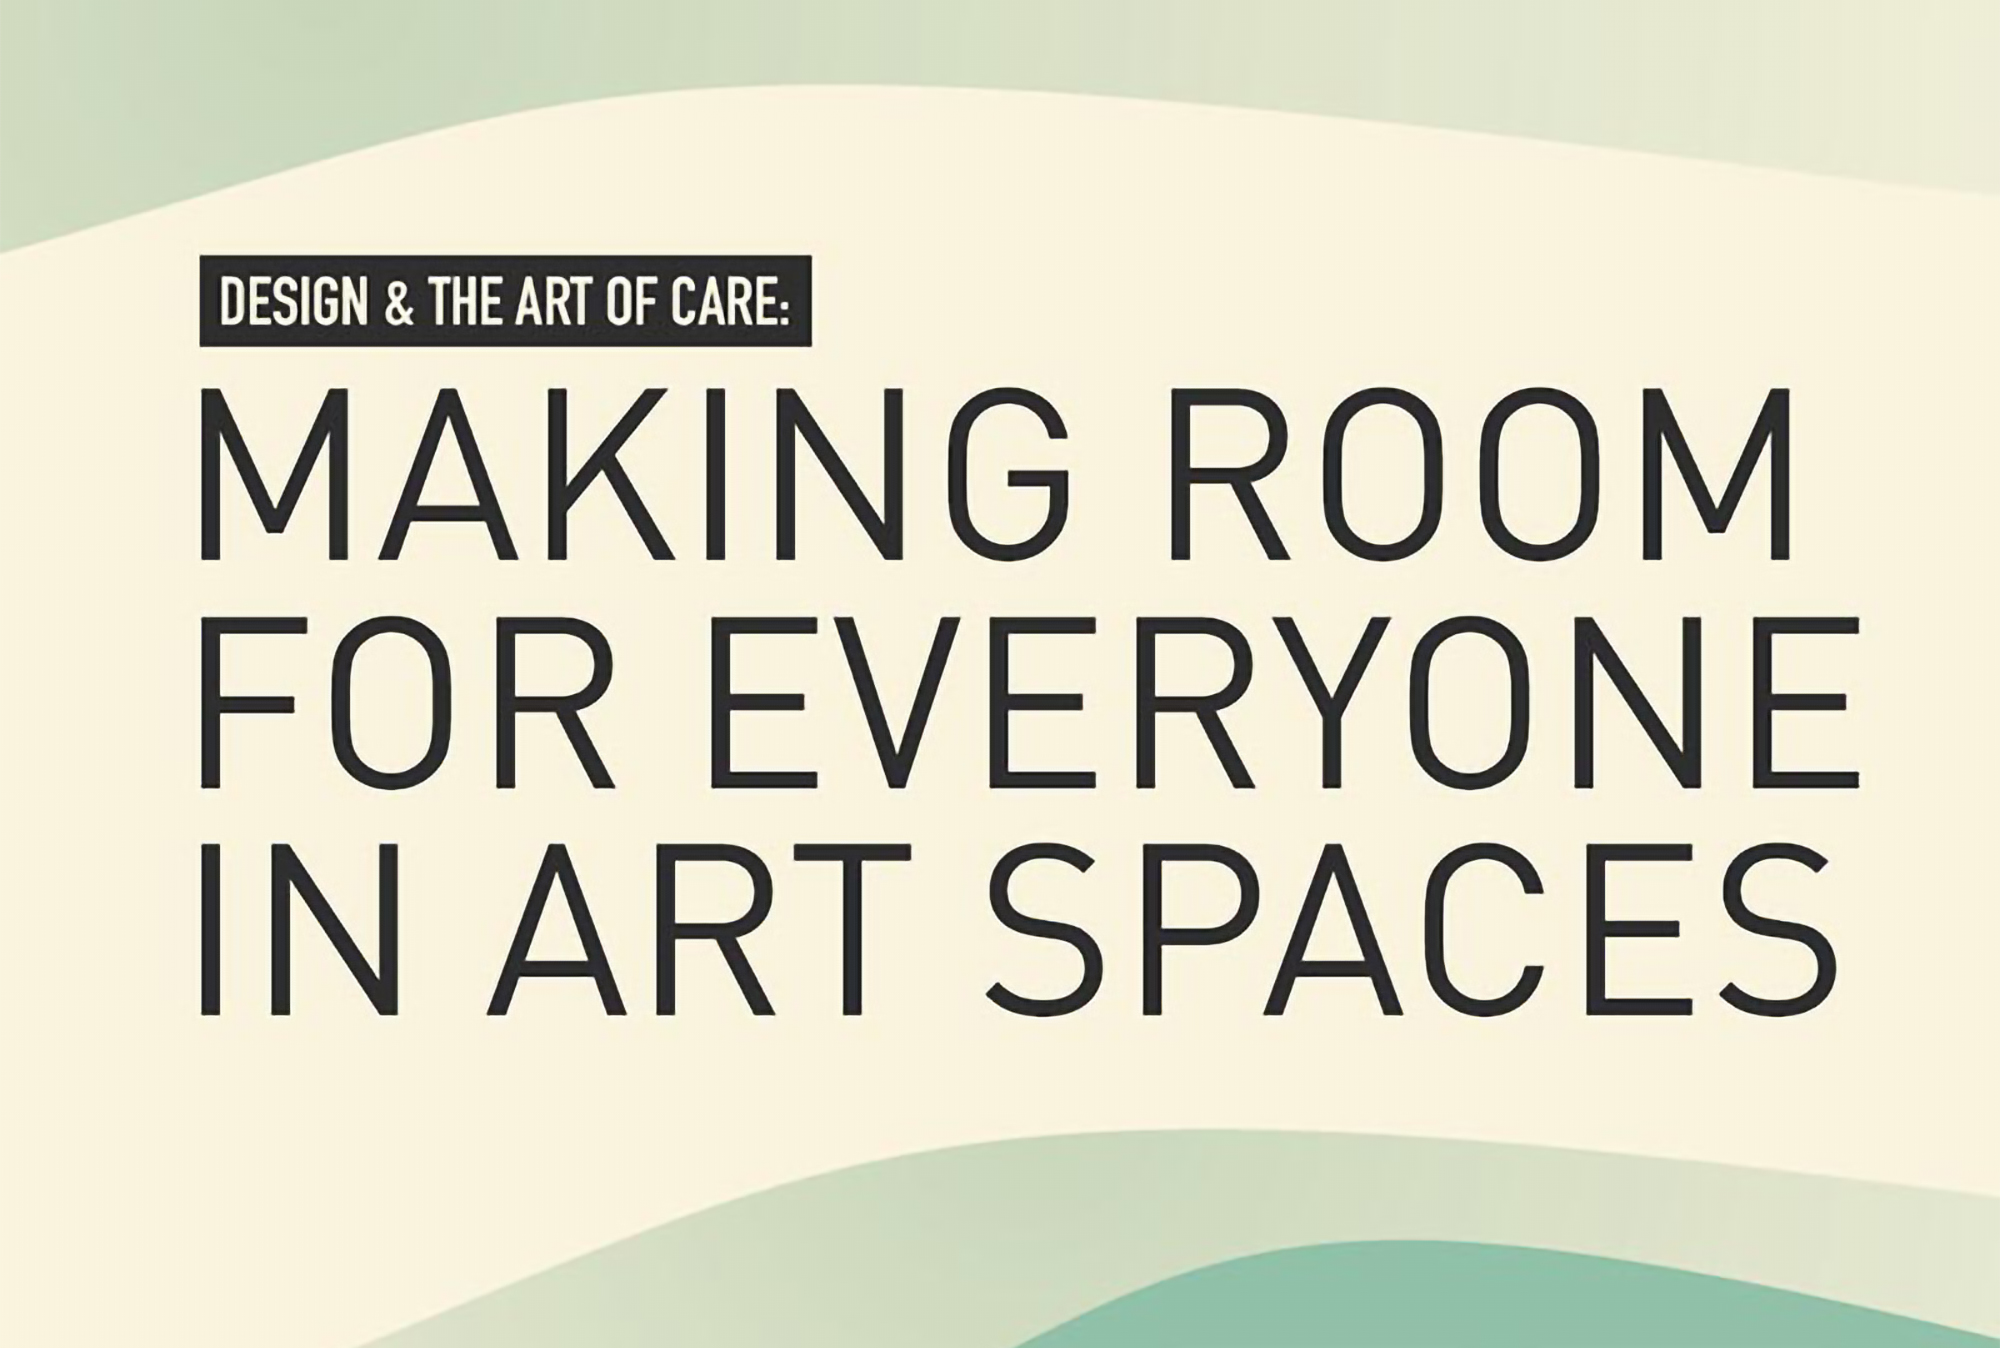 Making room for everyone in arts spaces title GBBN